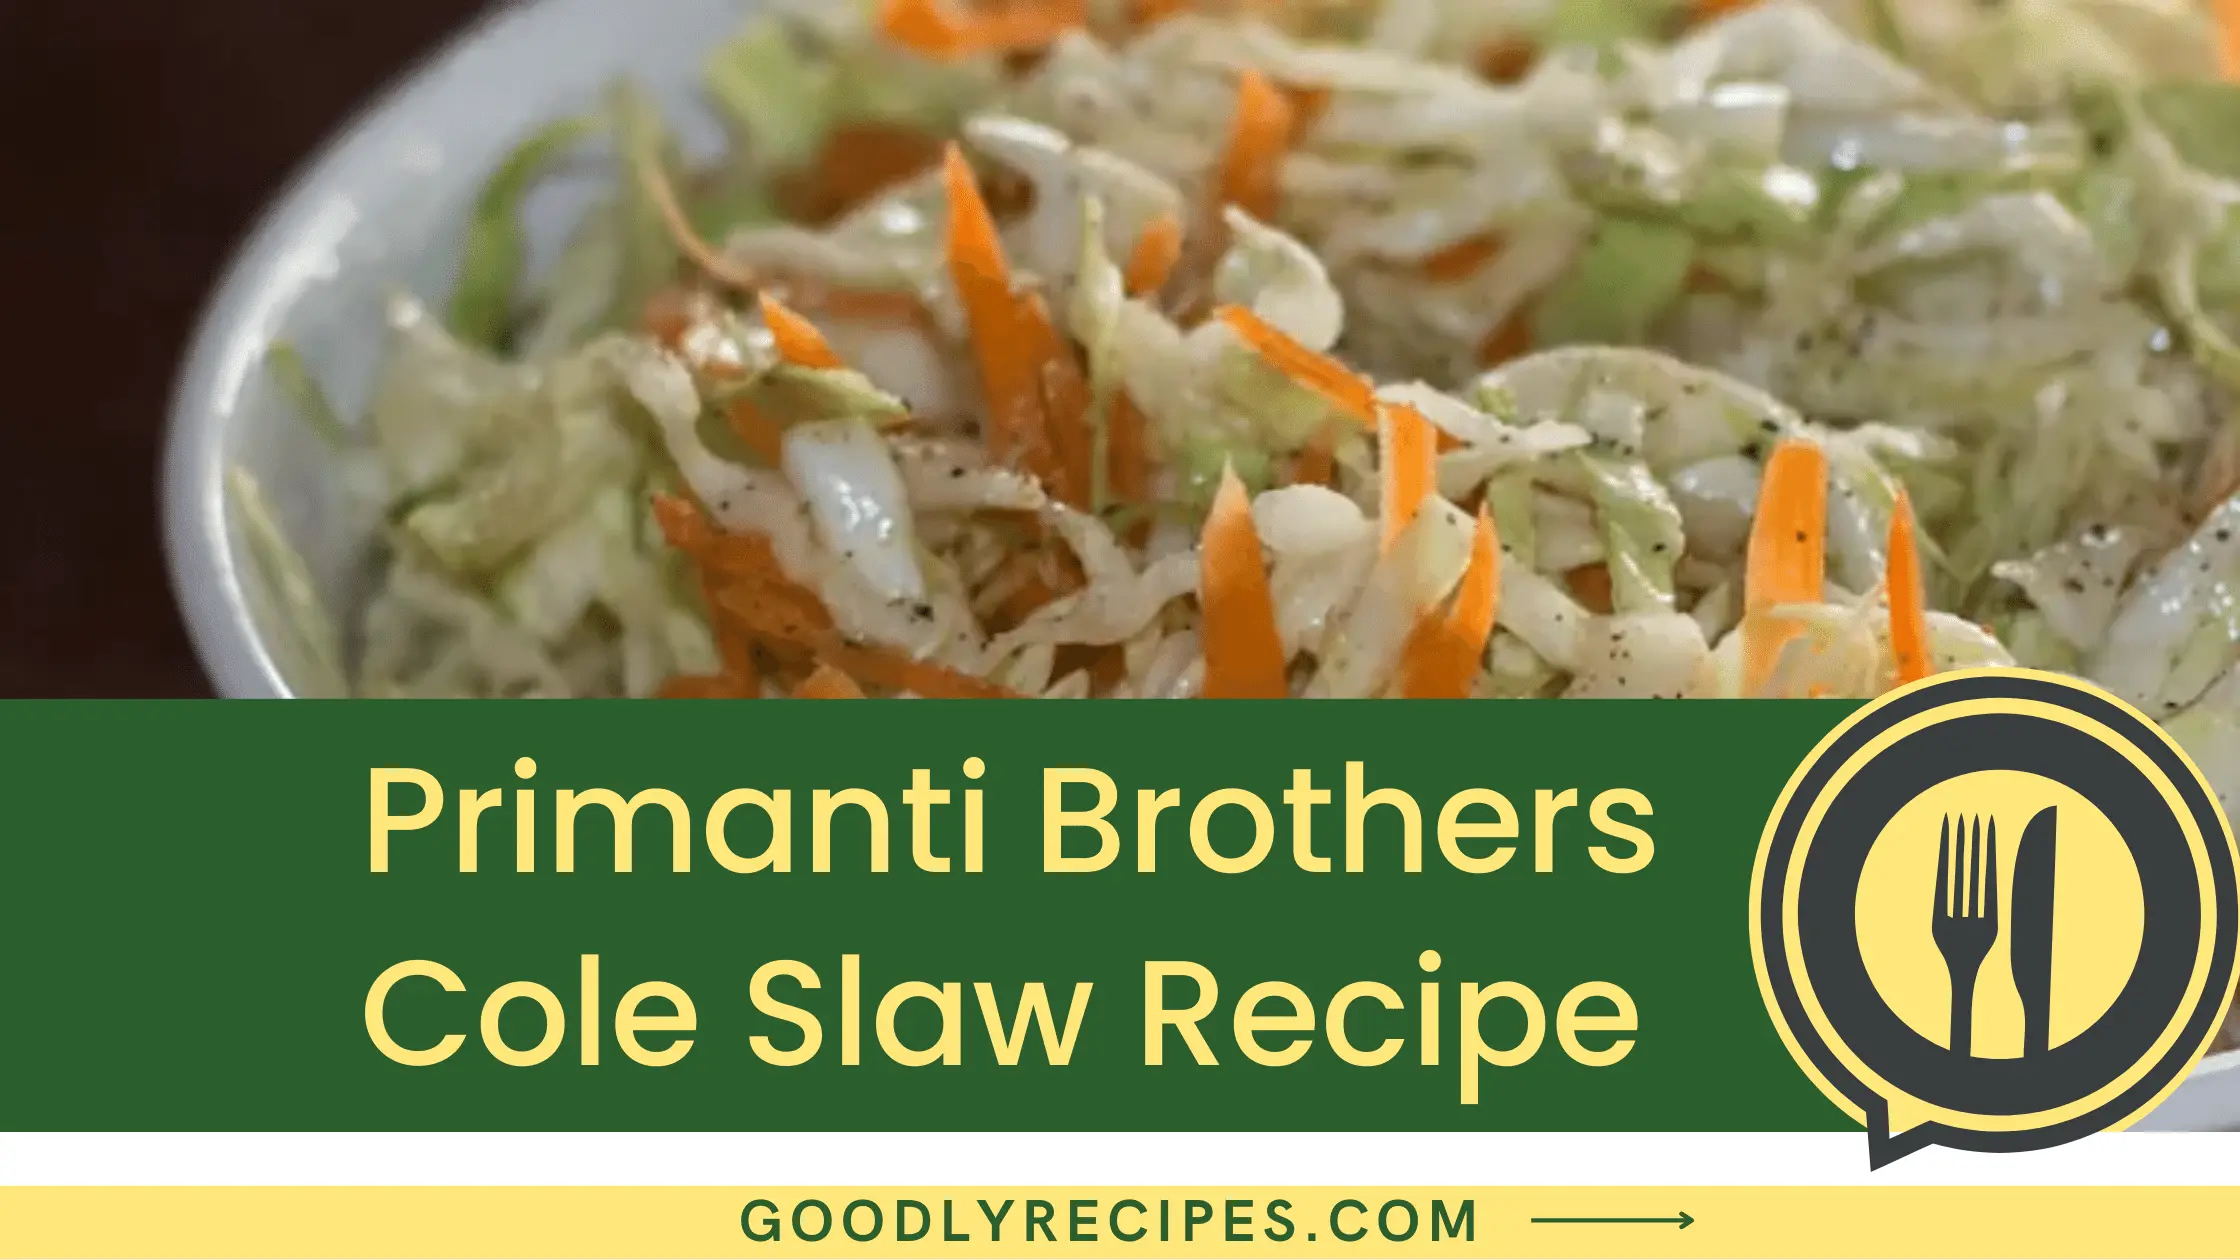 What is Primanti brothers’ cole slaw?